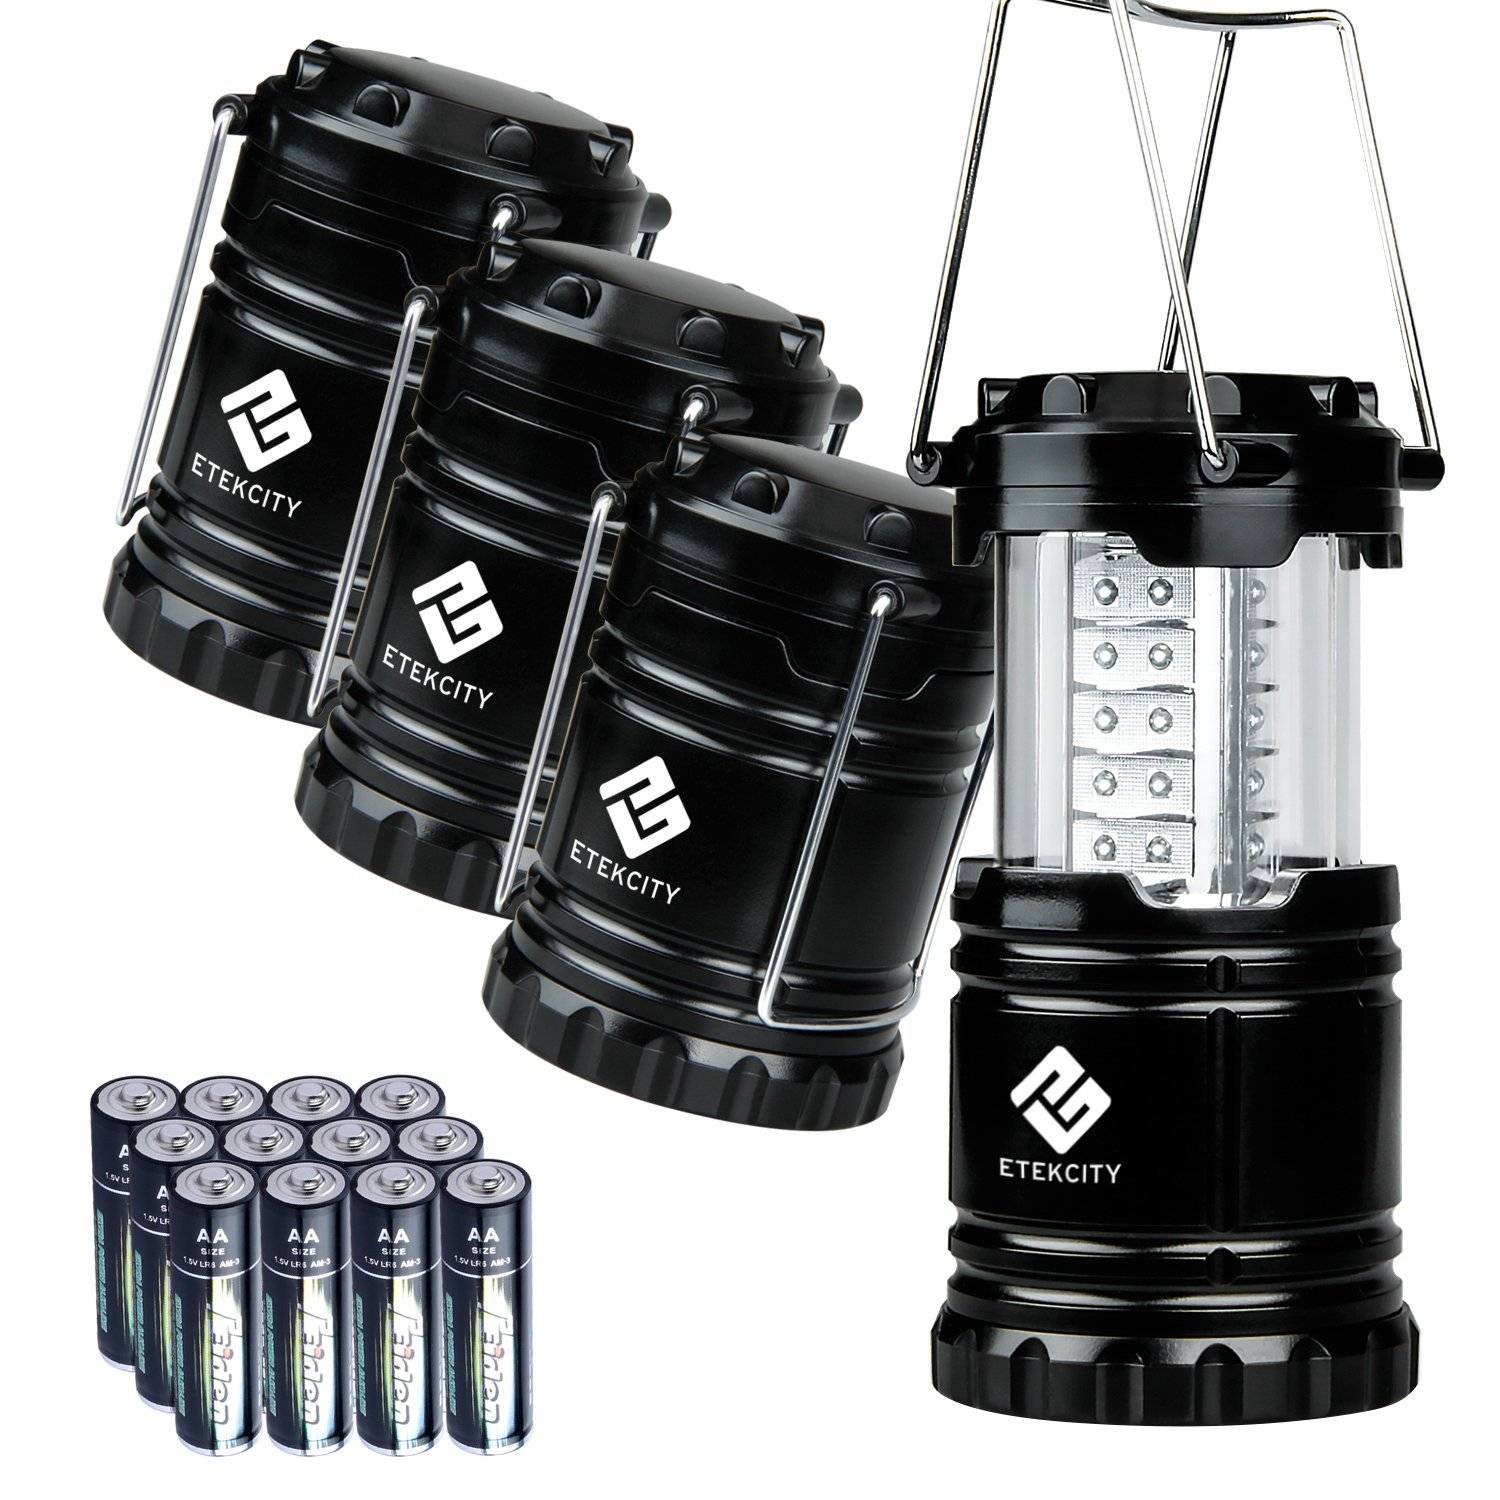 Etekcity 4 Pack Collapsible LED Camping Lantern with 12 AA Batteries